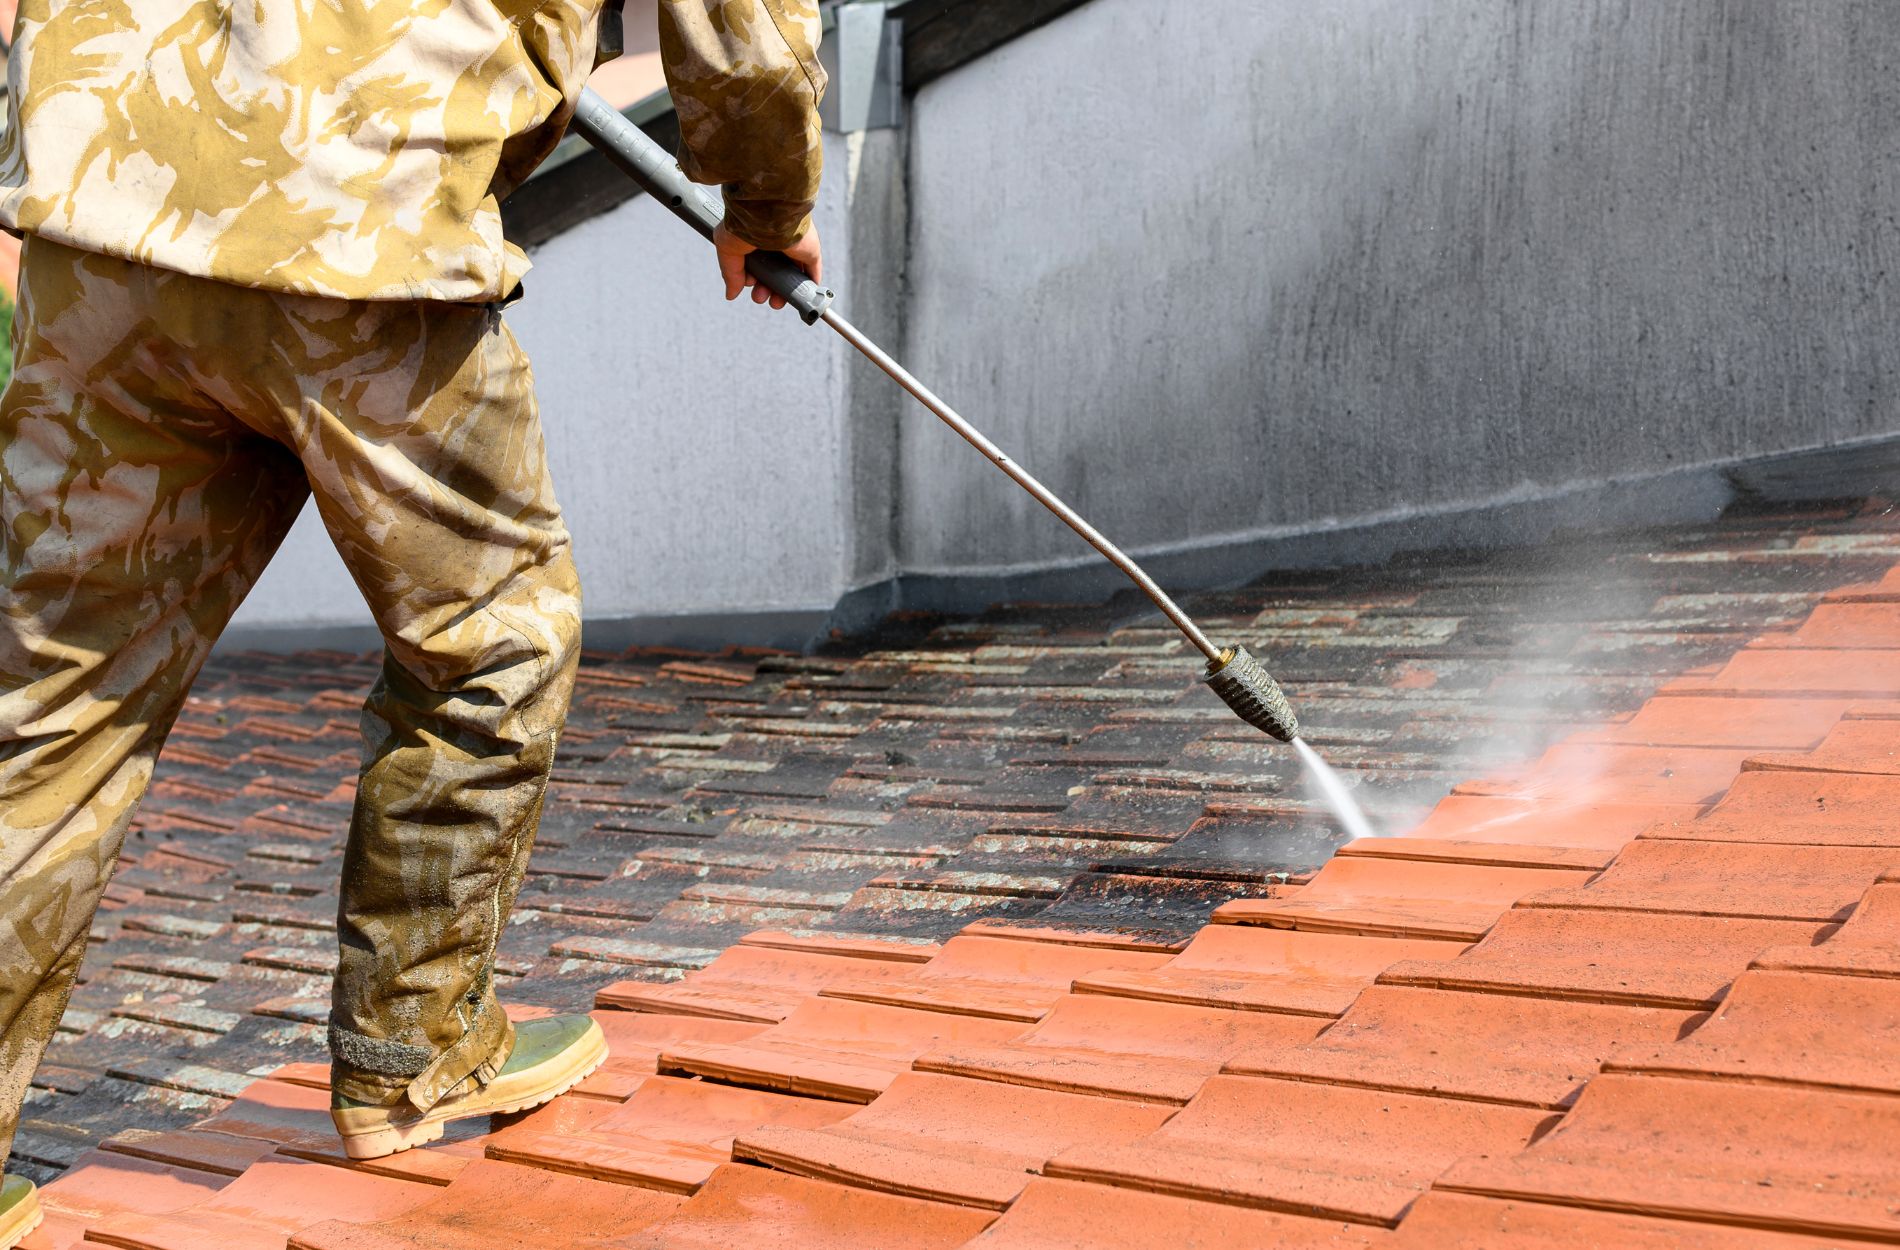 Best Practices for Safe Roof Cleaning